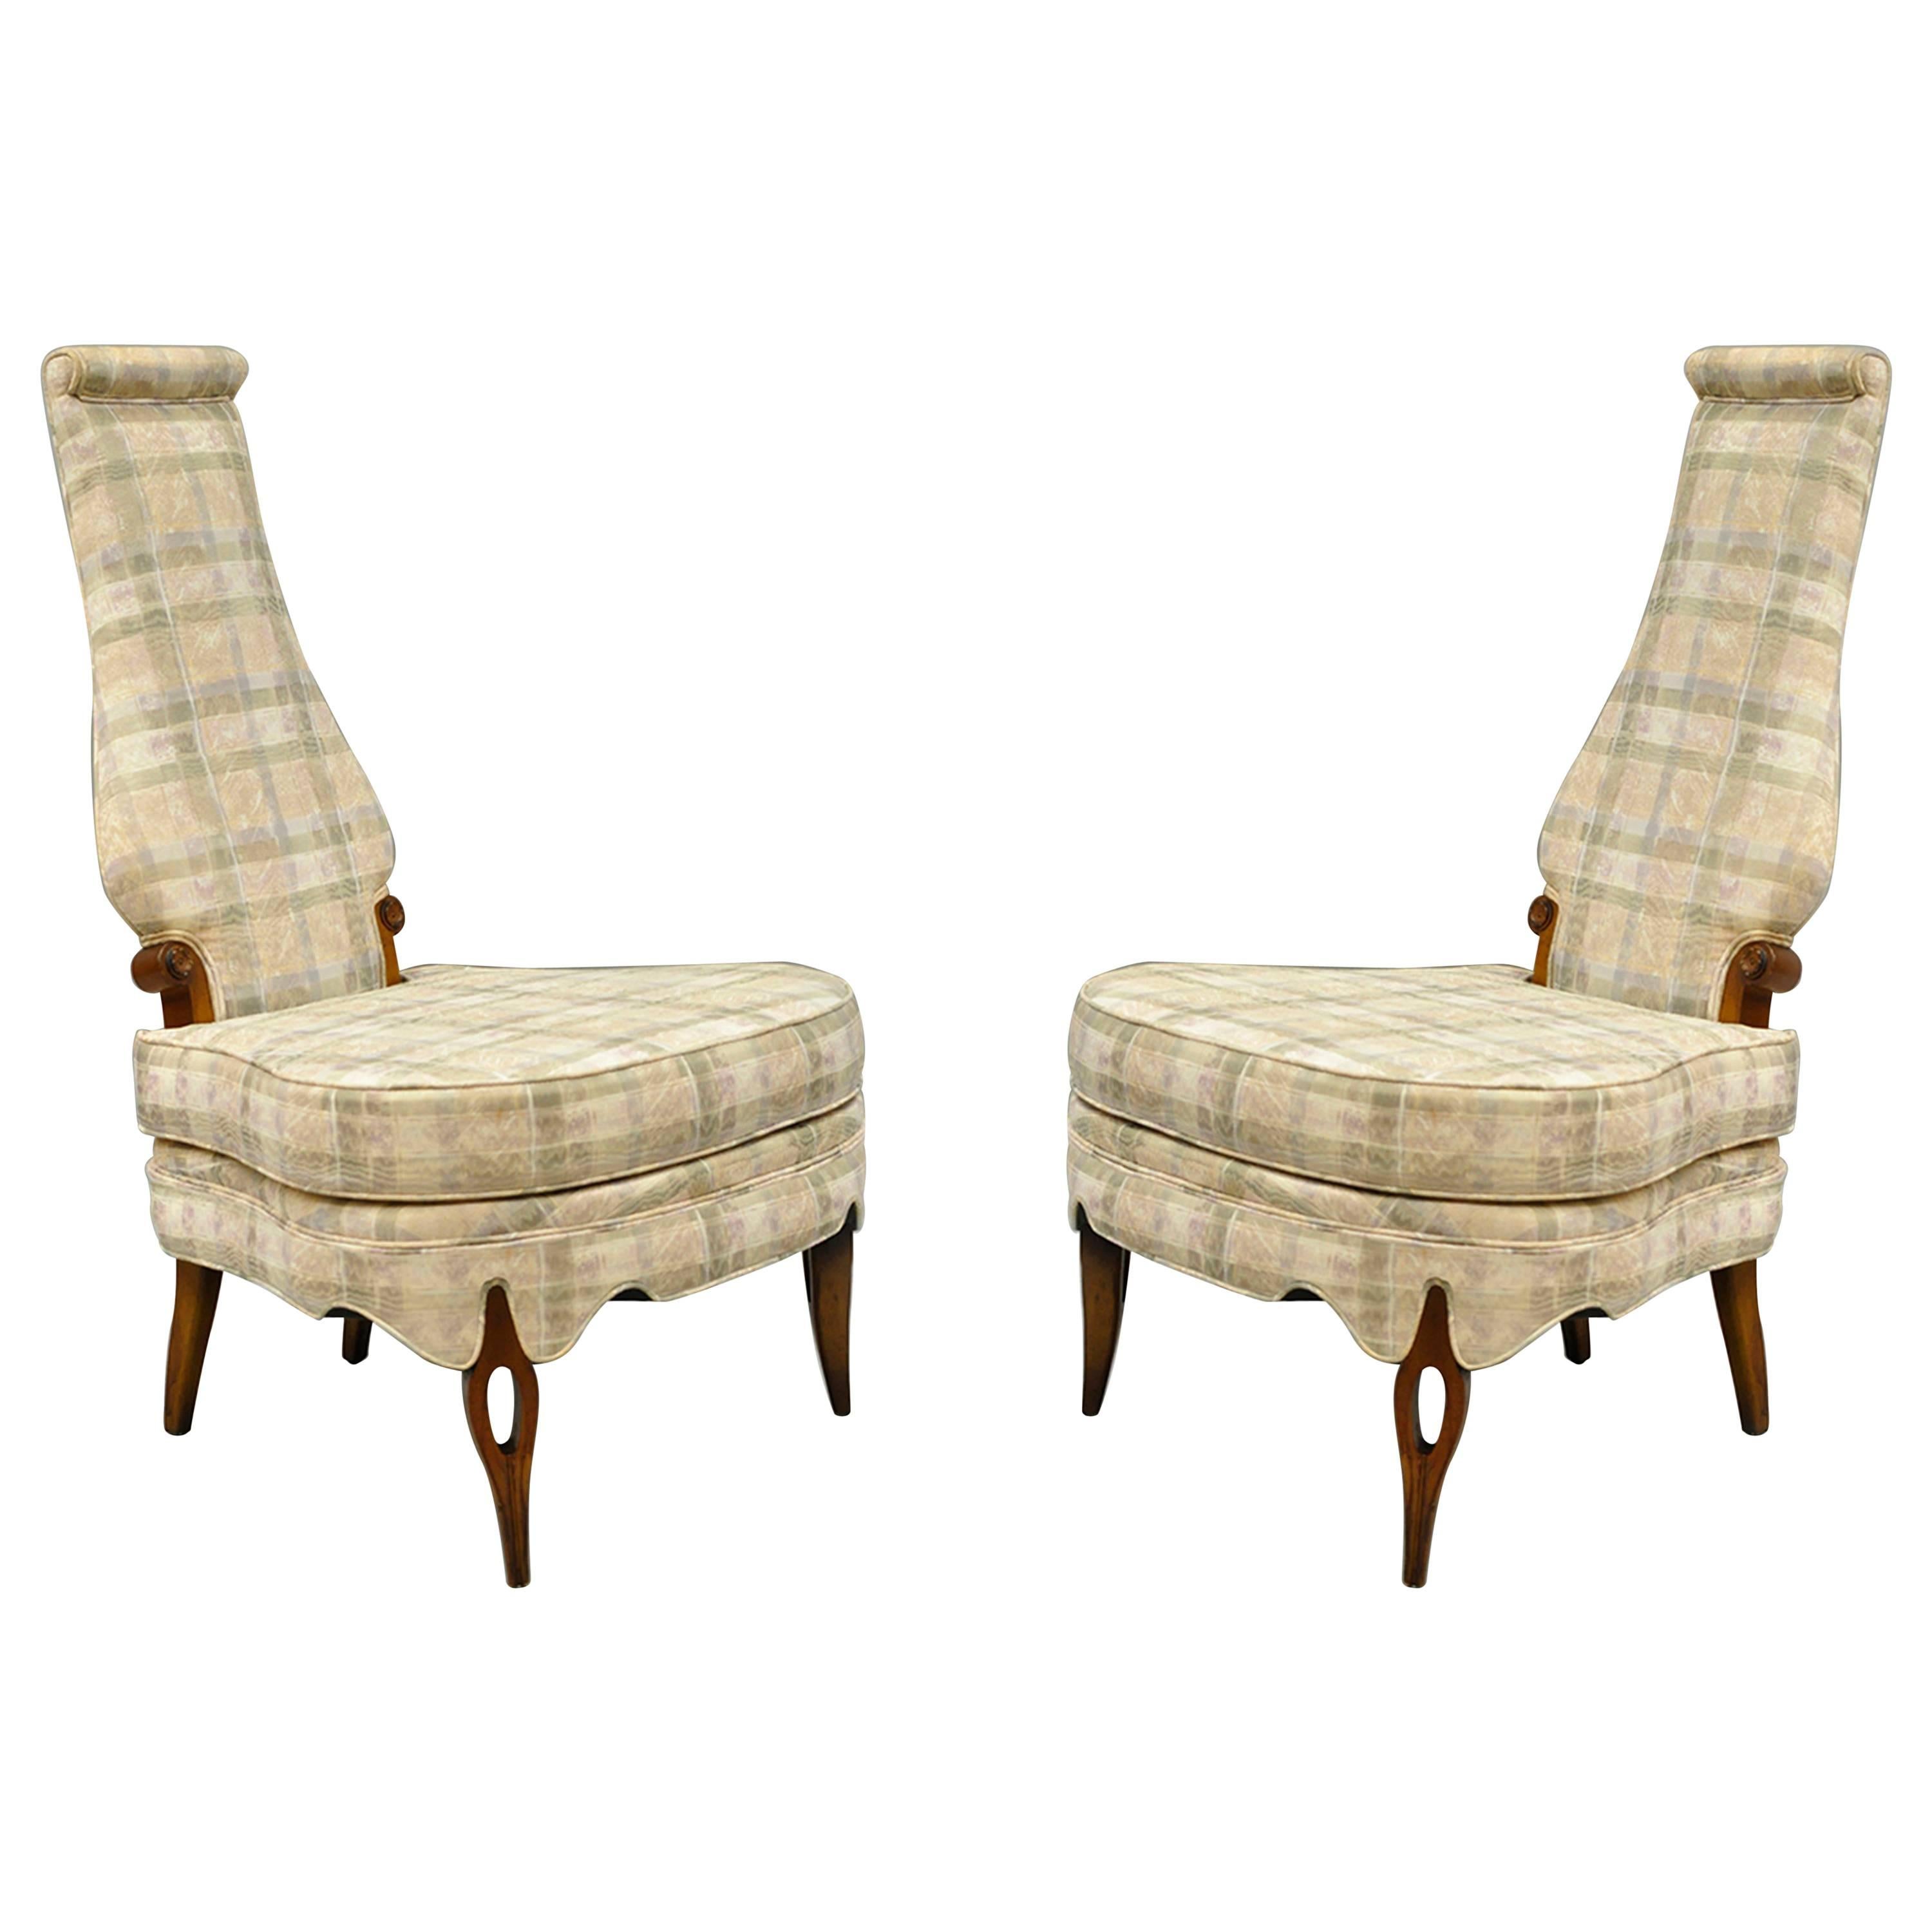 Pair of Hollywood Regency High Back Slipper Lounge Chairs After Dorothy Draper